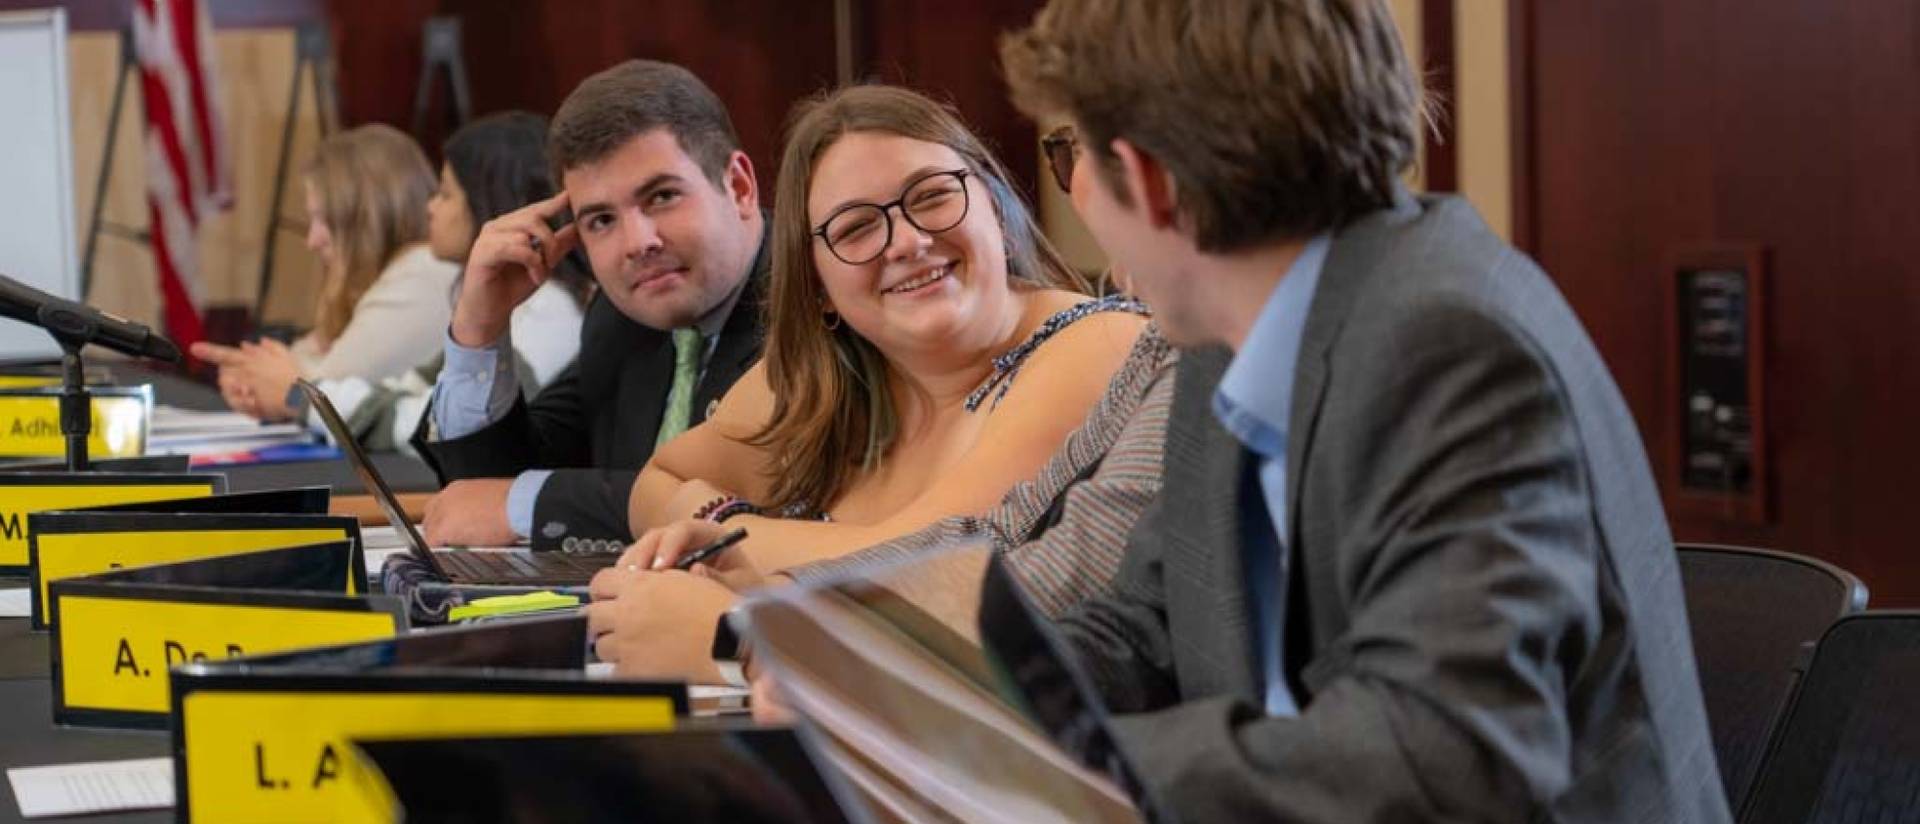 Student Senate in session, female student facing camera, smiling, all students seated at a skirted table